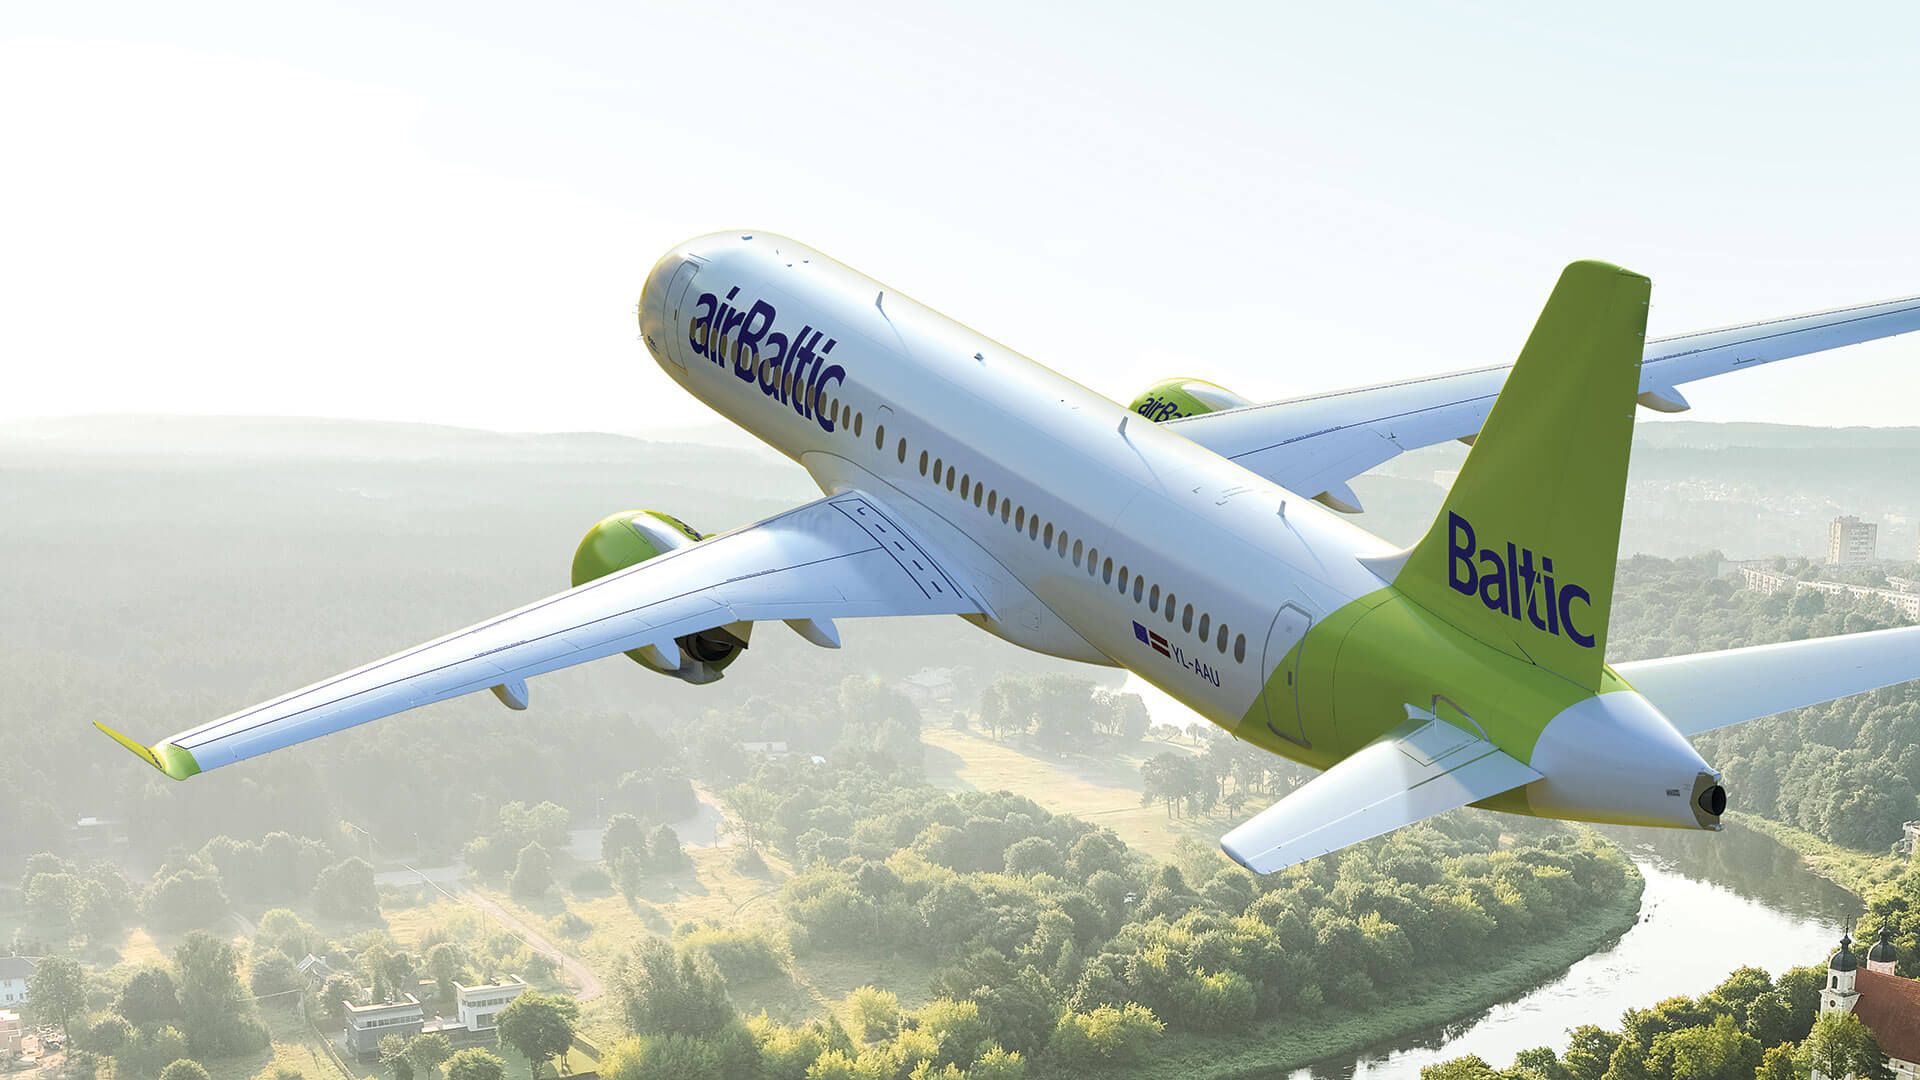 airbaltic will fit its entire Airbus A220-300 fleet with Starlink wifi from SpaceX